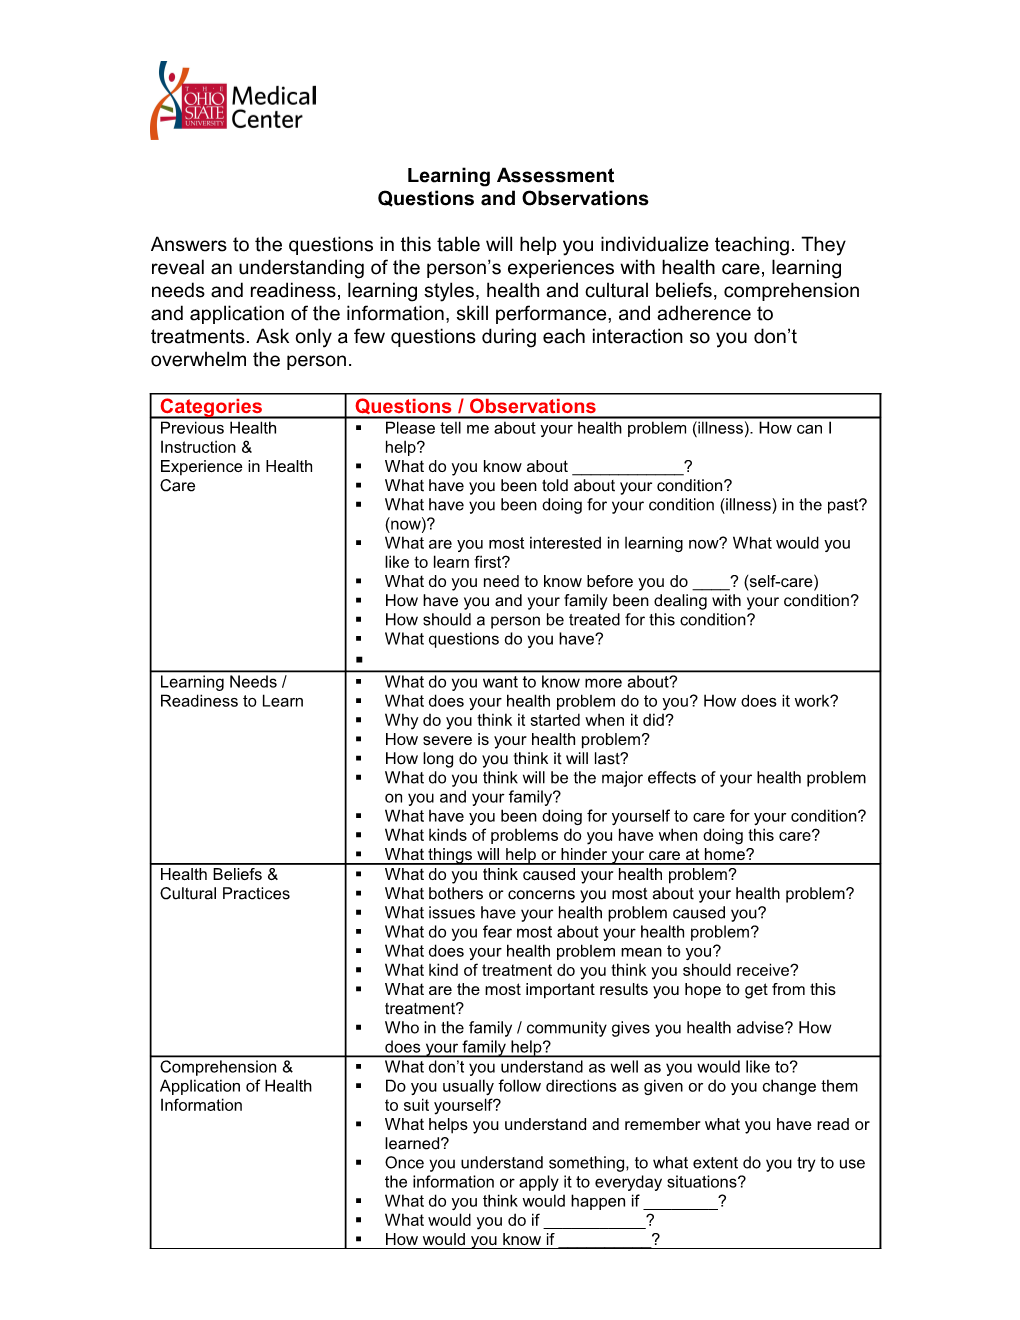 Learning Assessment: Questions and Observations